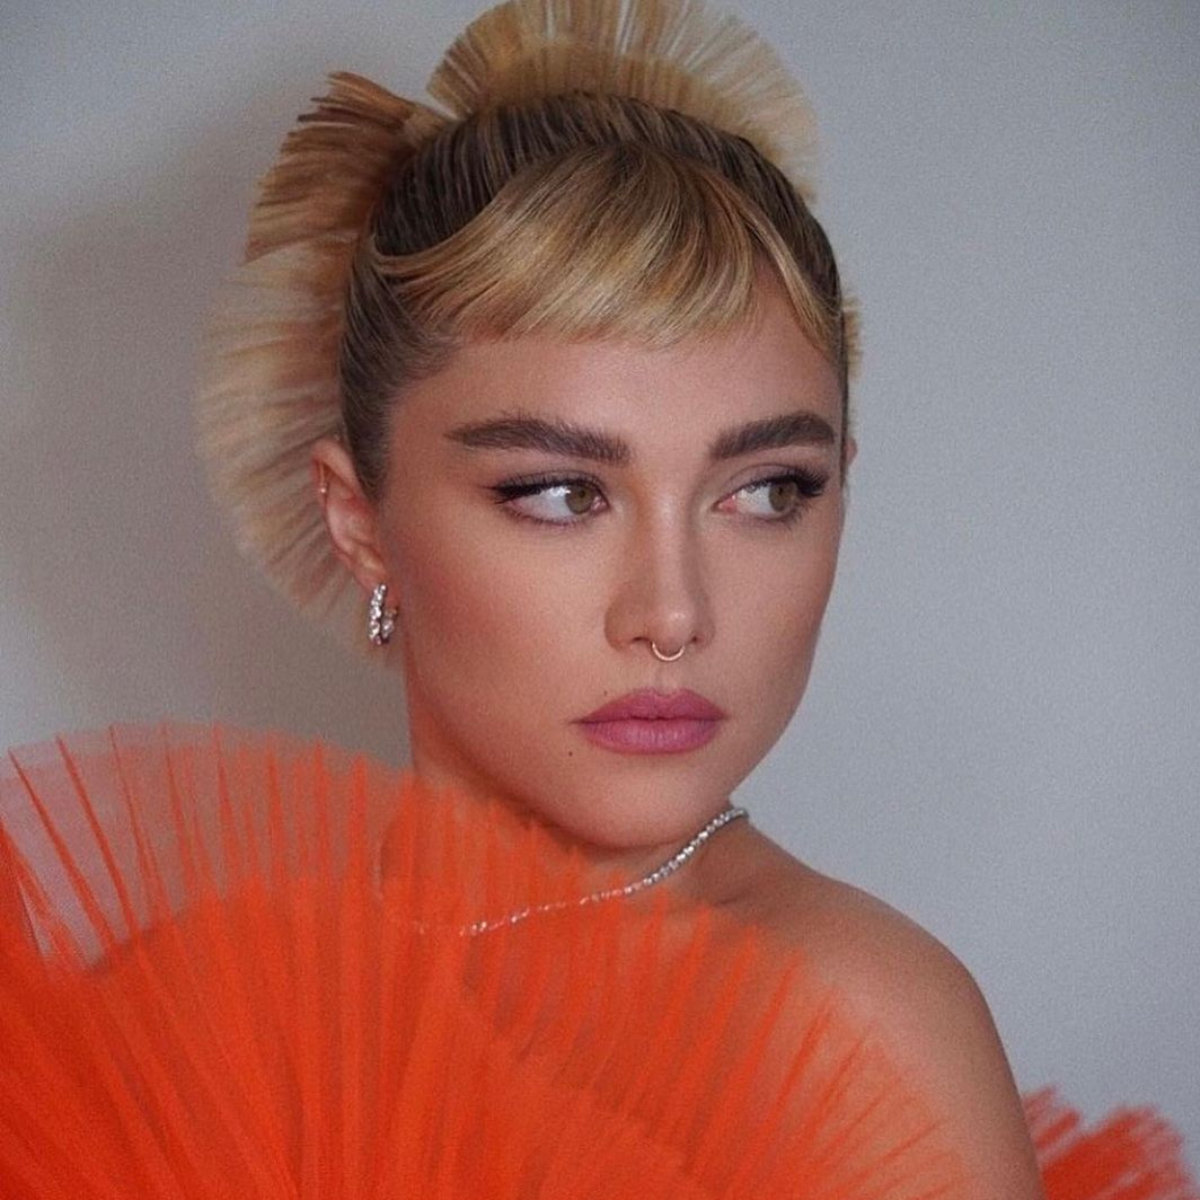 Behind the scenes image of model Florence Pugh of her makeup